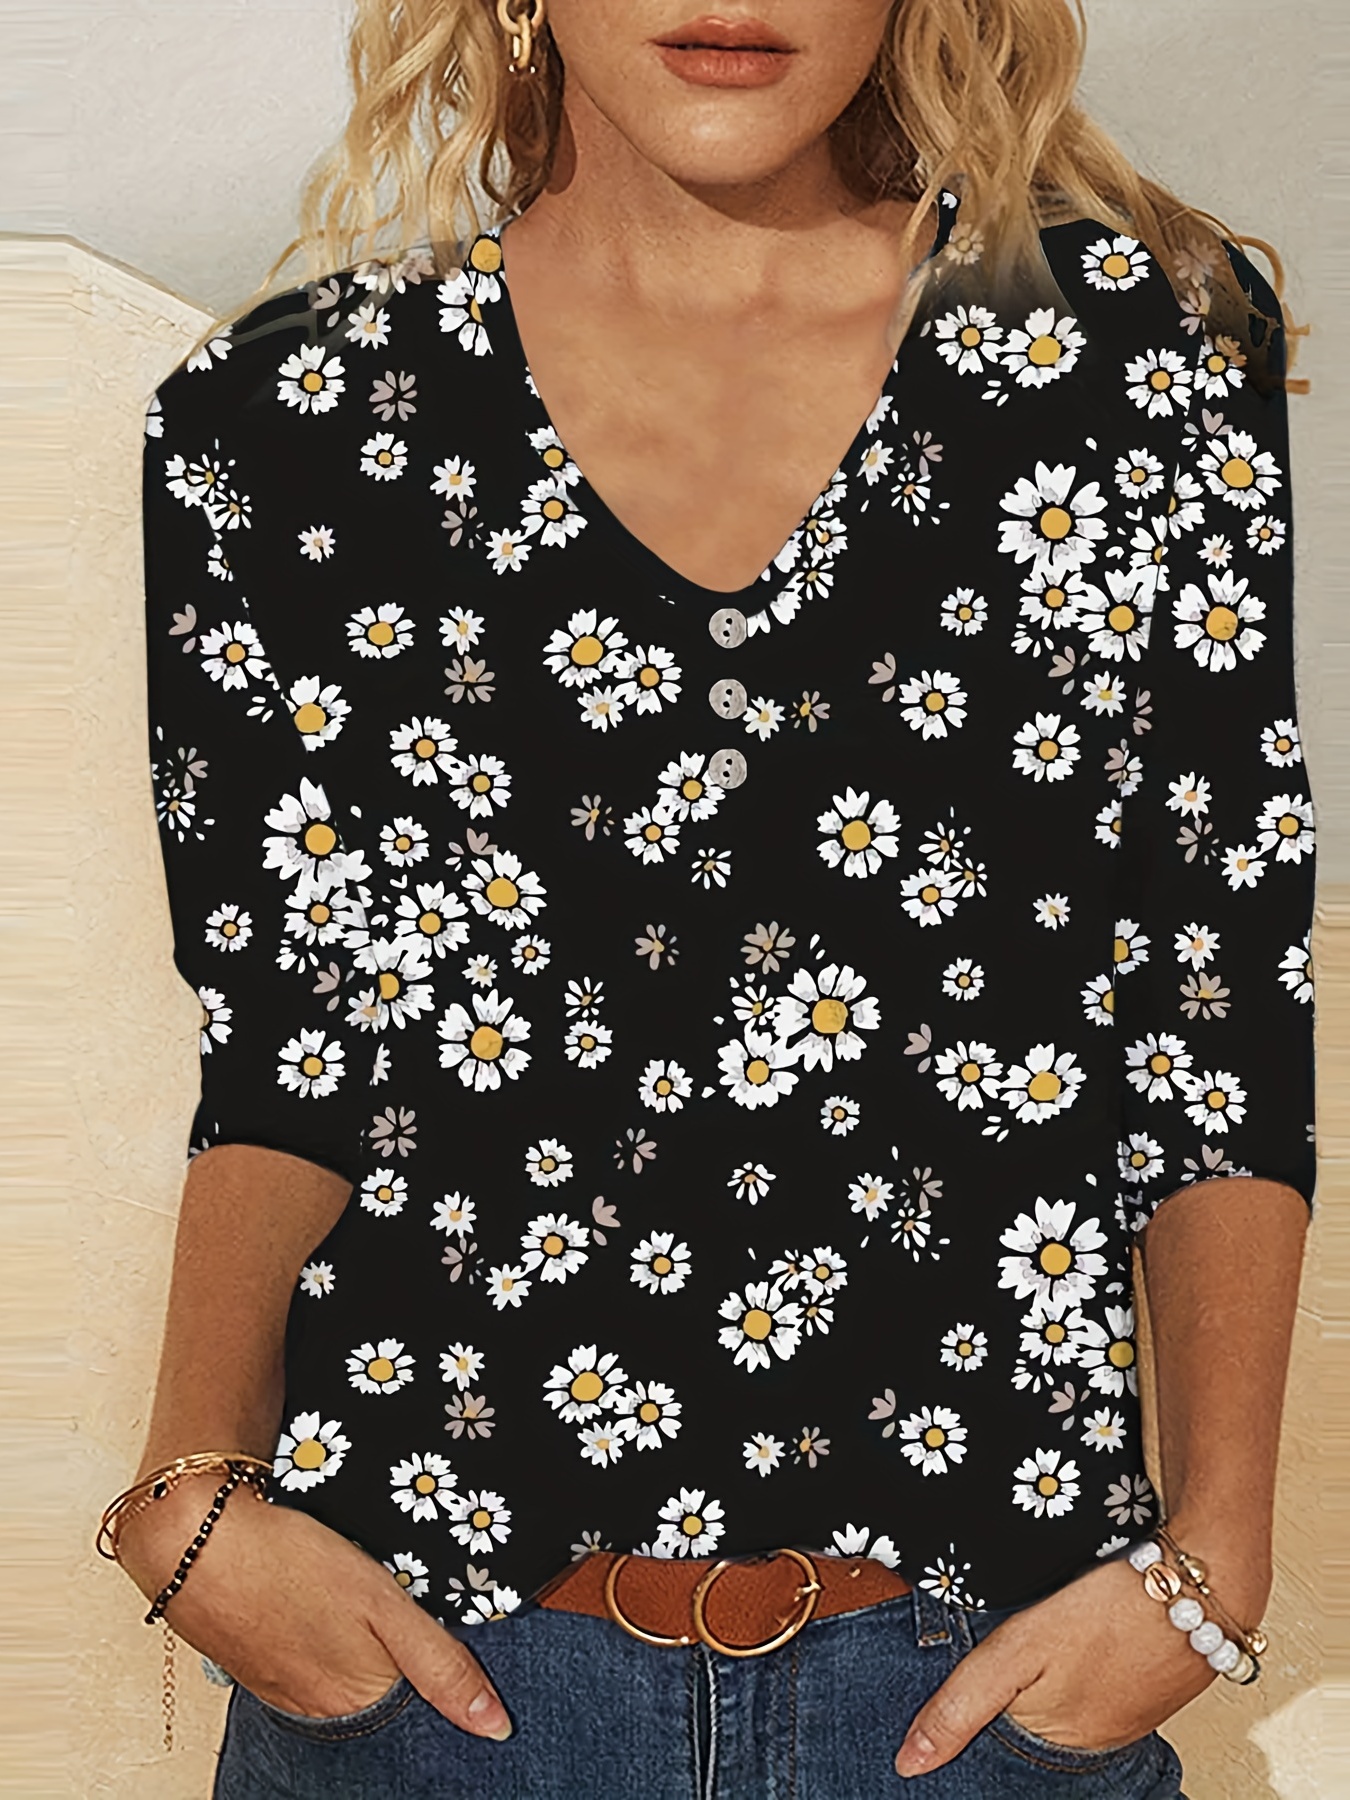 floral print button v neck t shirt casual long sleeve top for spring fall womens clothing